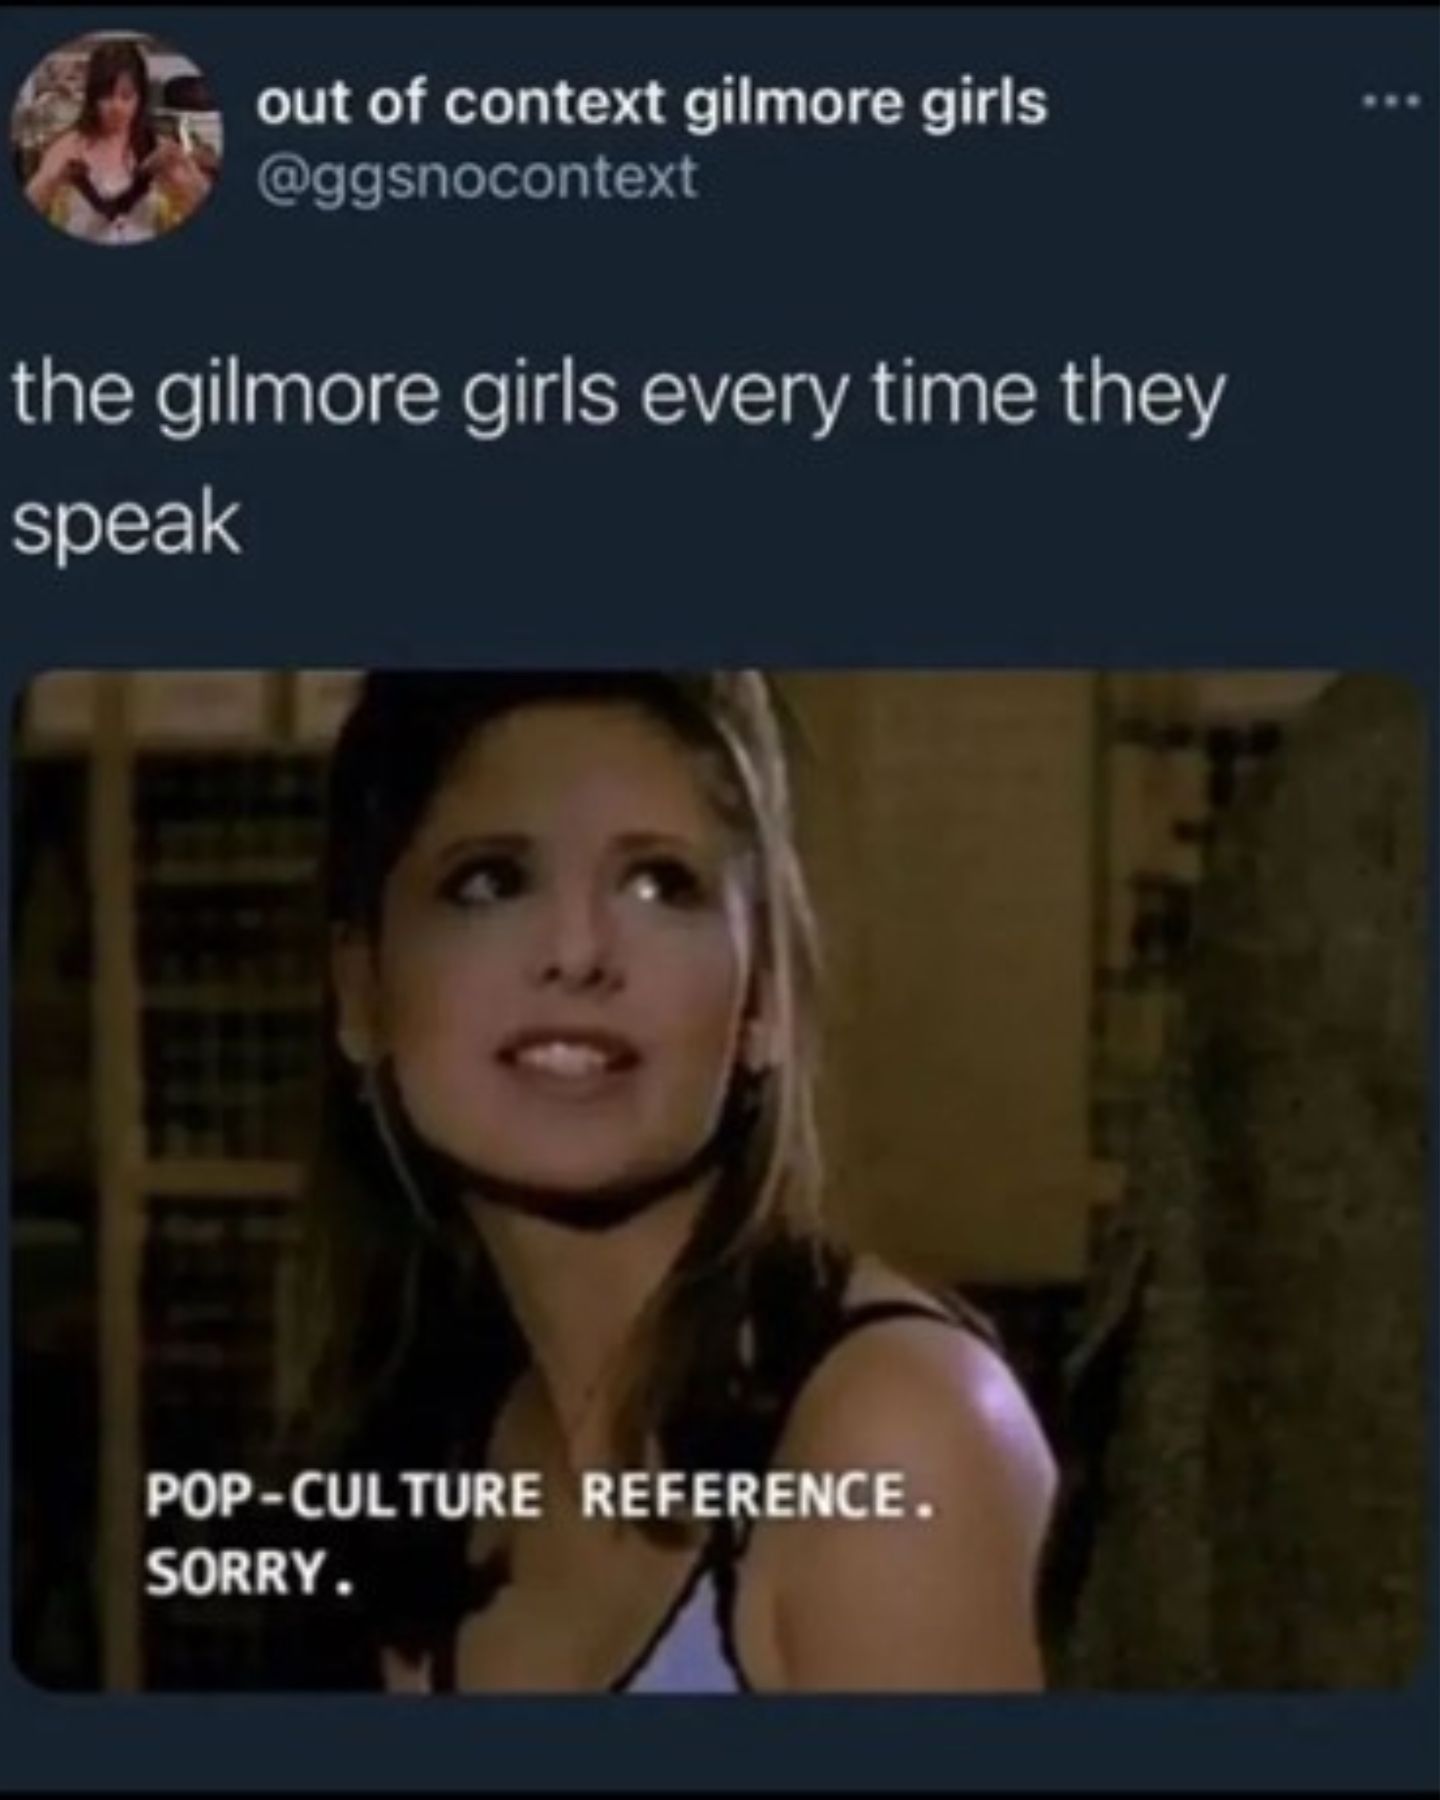 Meme about the way Lorelei and Rory speak from Gilmore Girls. 